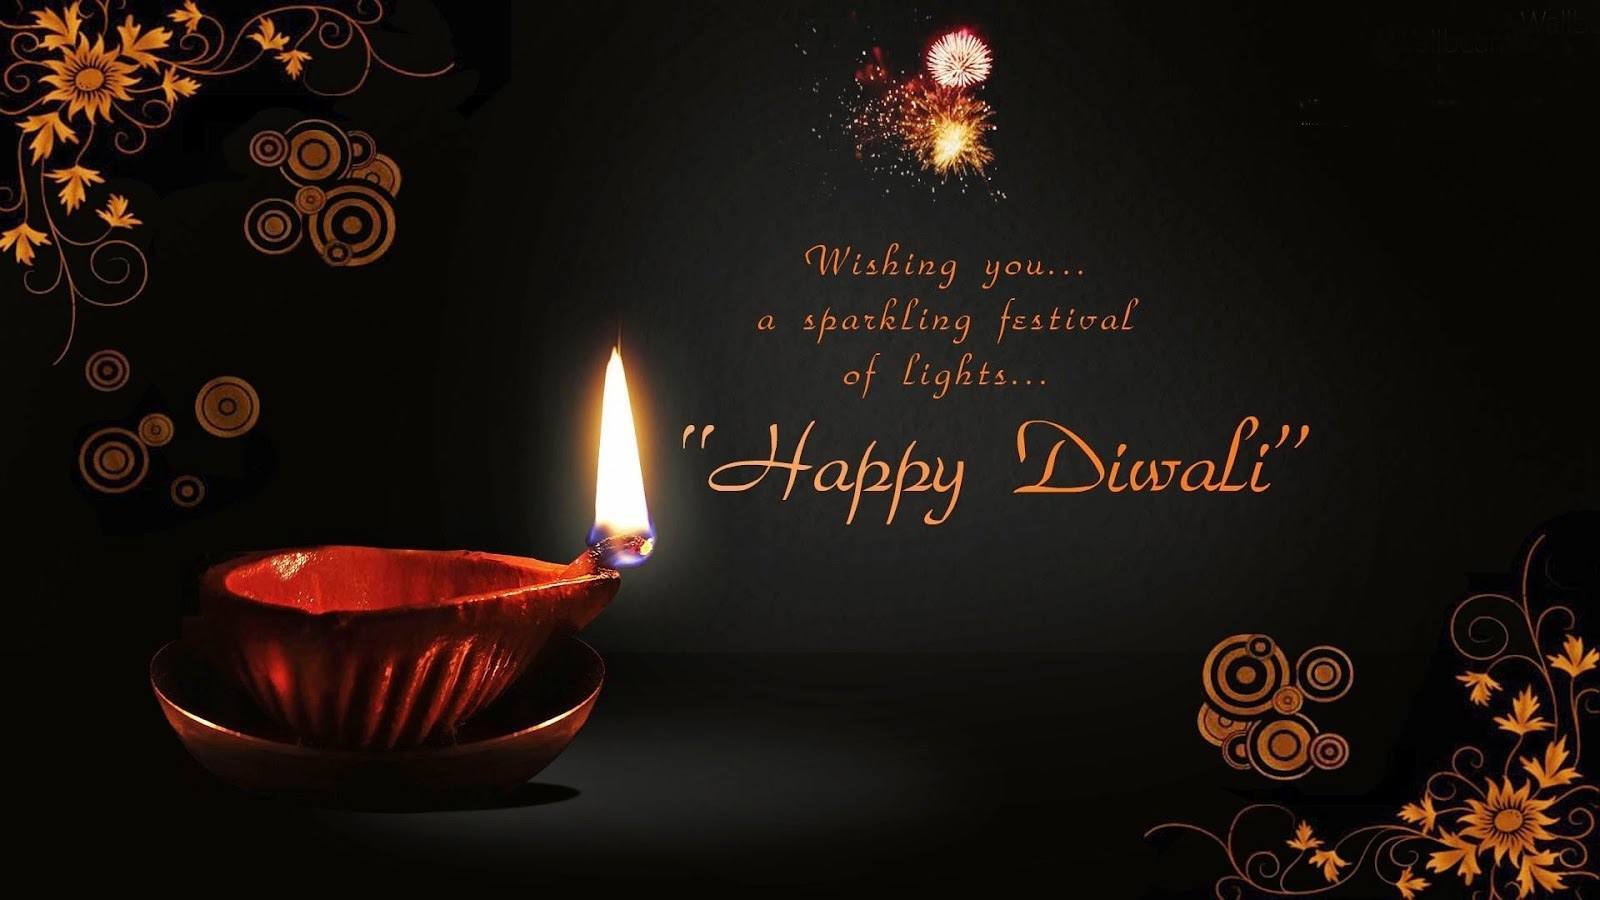 wishing you a sparkling festival of lights happy diwali